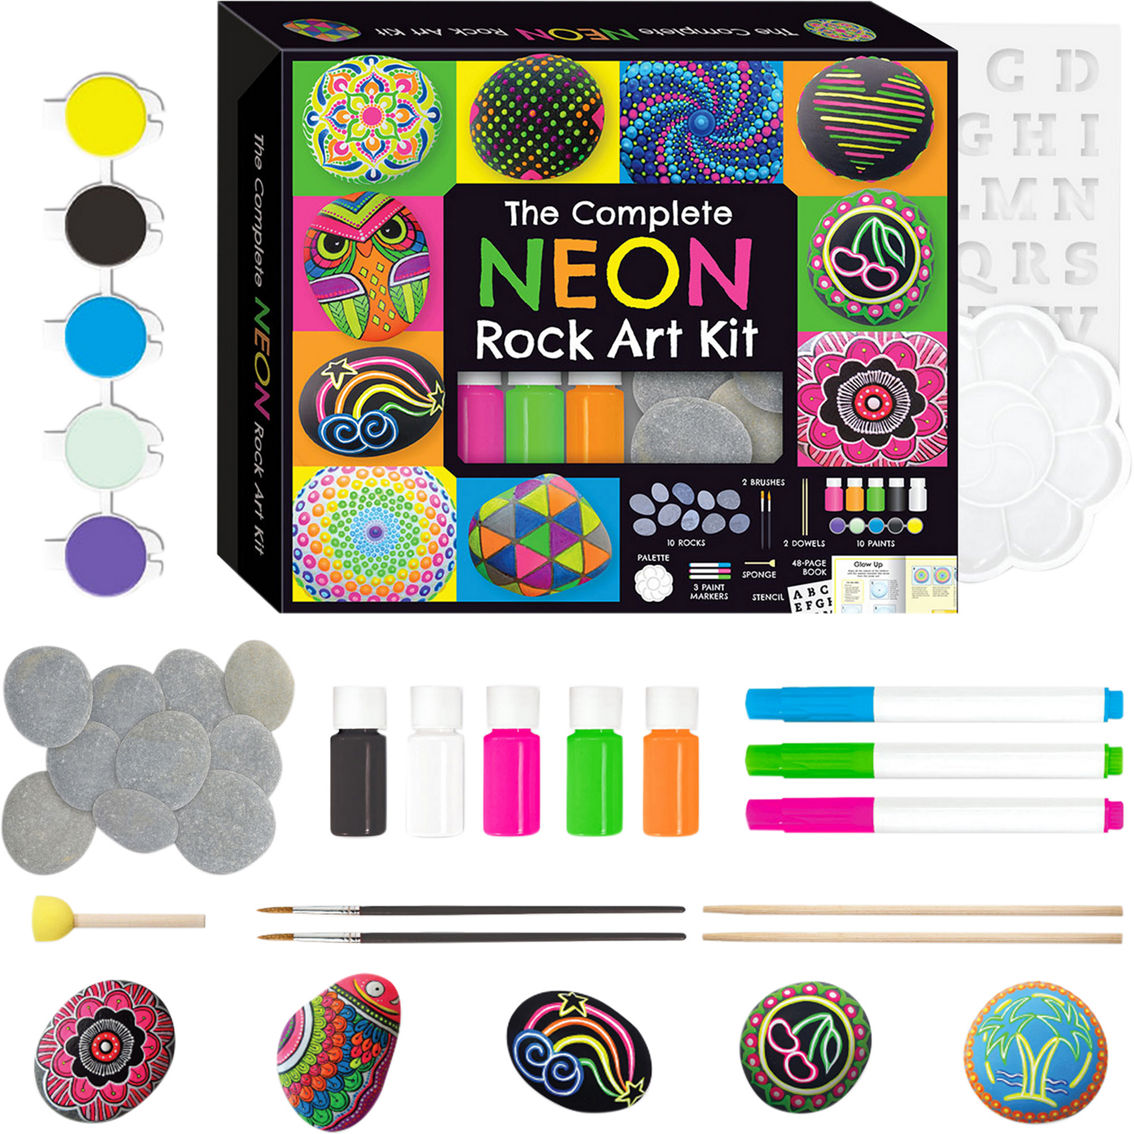 The Complete Neon Rock Art Kit - Image 3 of 6